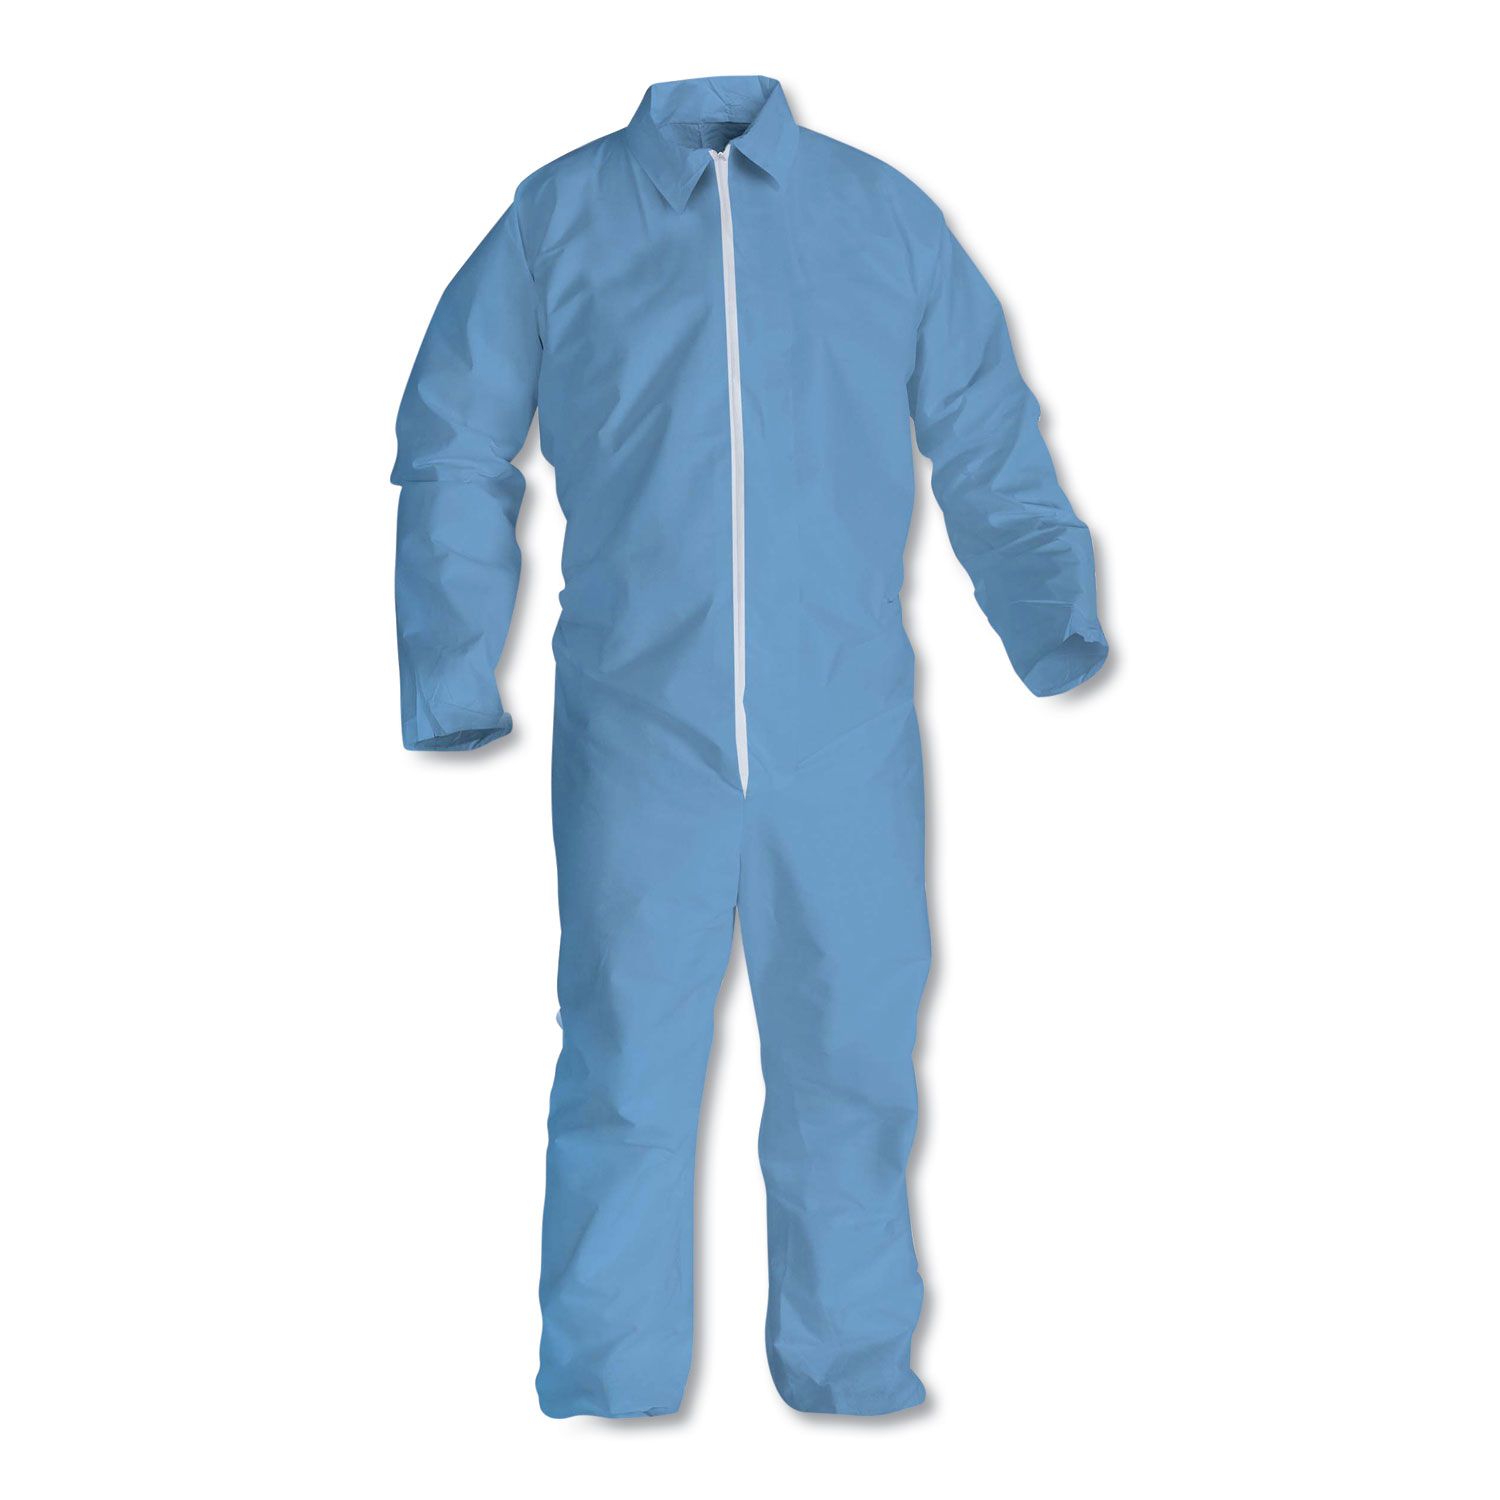  KleenGuard 45315 A65 Flame Resistant Coveralls, 2X-Large, Blue (KCC45315) 